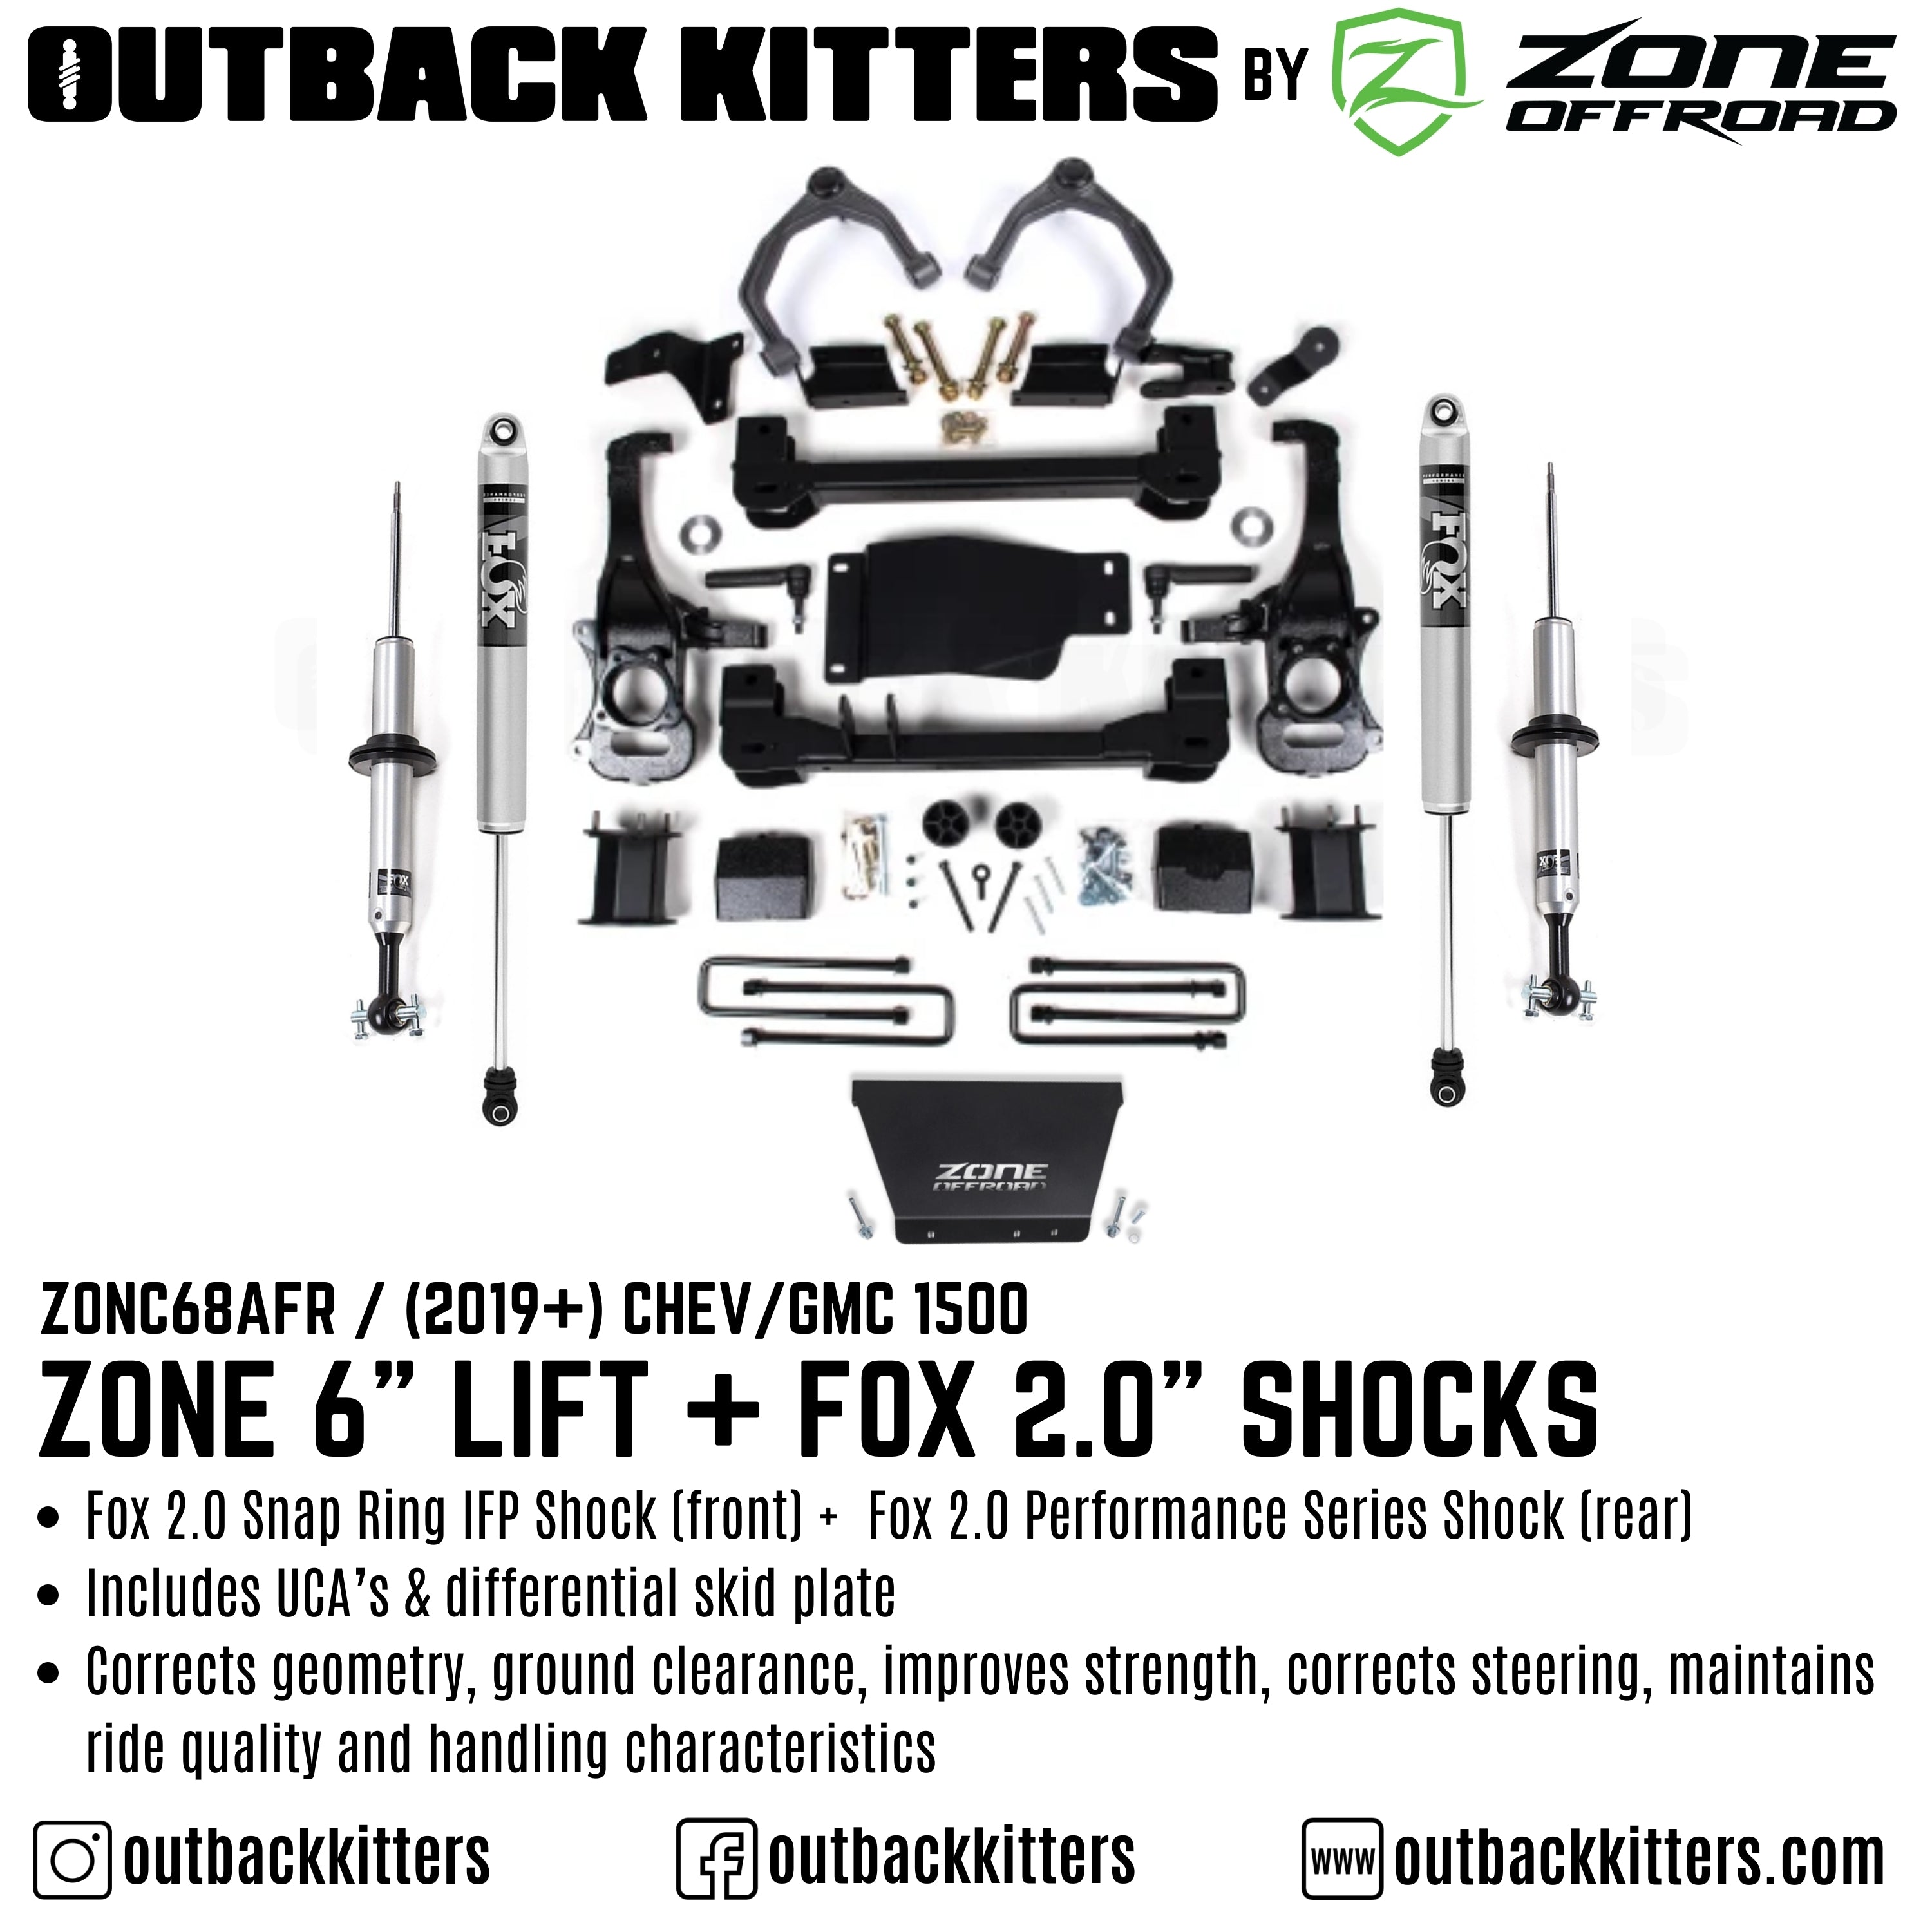 OK by Zone Offroad  6” Lift Kit for 2019+ Chev/GMC 1500 - Outback Kitters